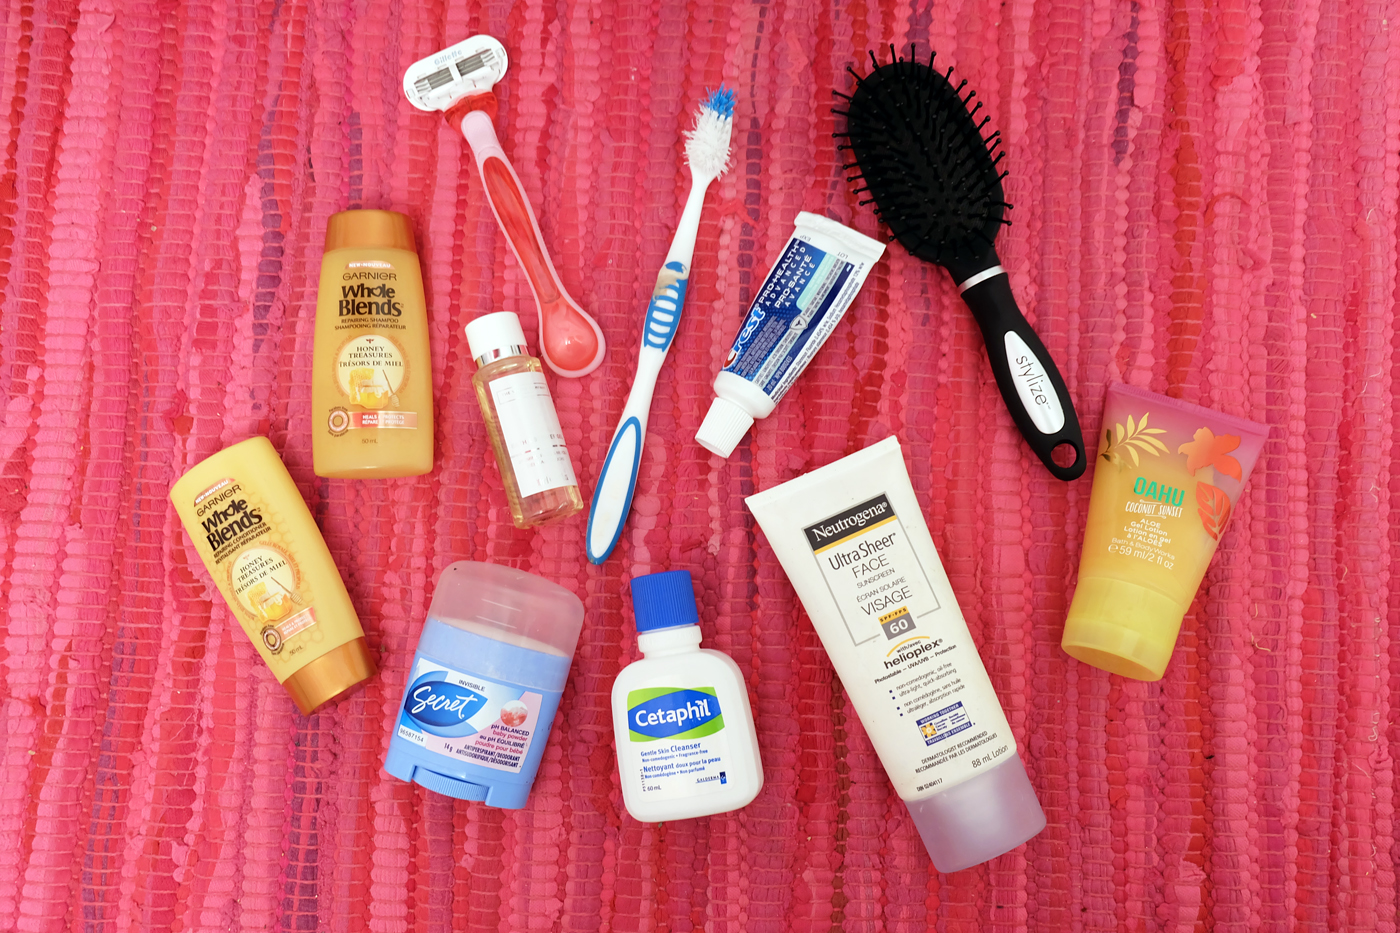 HOW TO GET THE MOST WEAR OUT OF THE TOILETRY 26